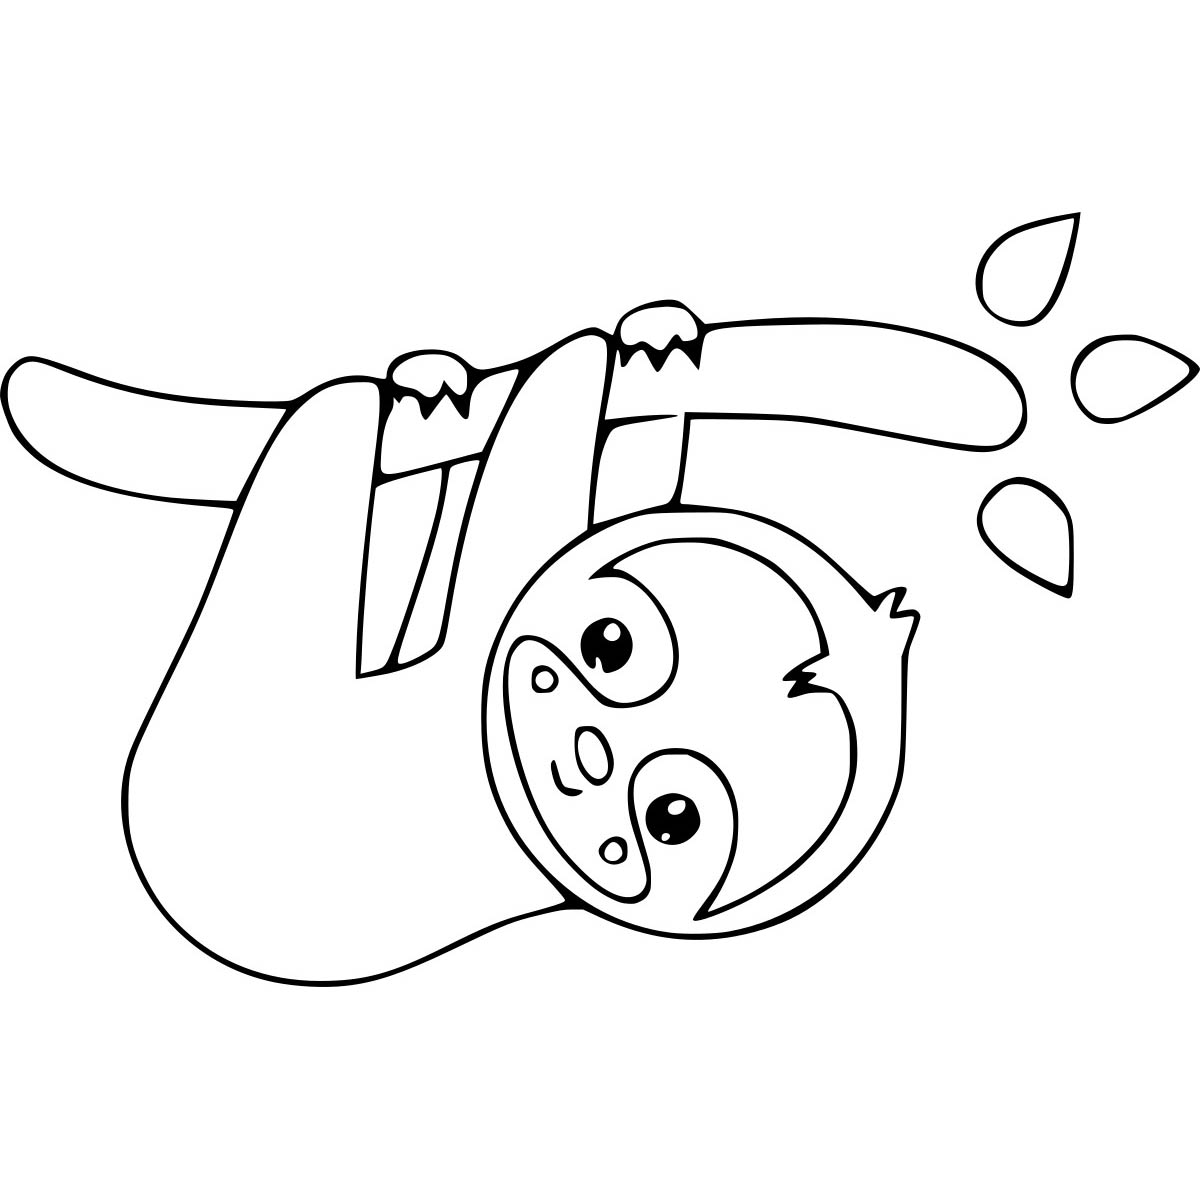 Free Baby Sloth Coloring Pages Printable printable